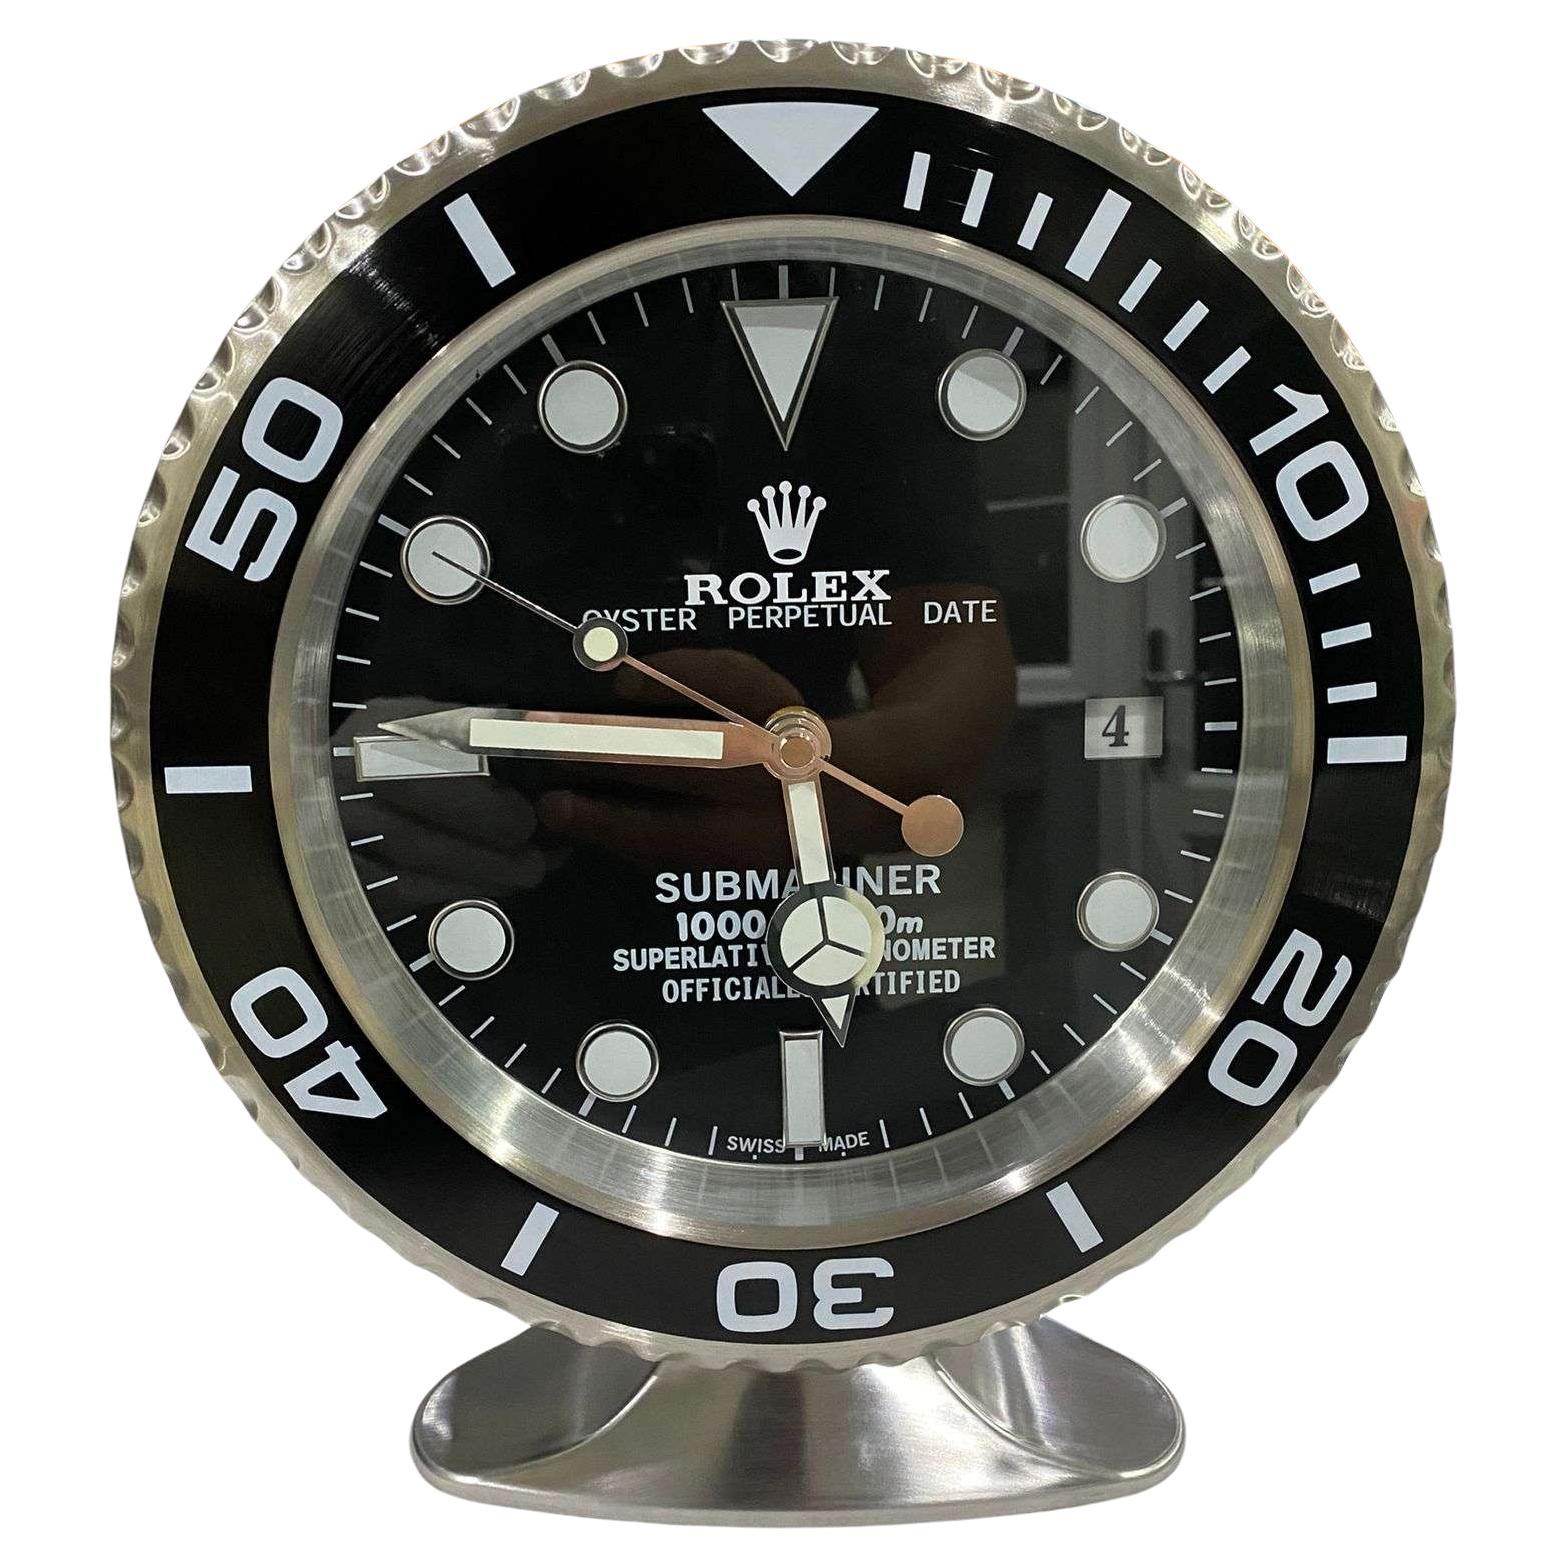 ROLEX Officially Certified Oyster Perpetual Black Submariner Desk Clock 